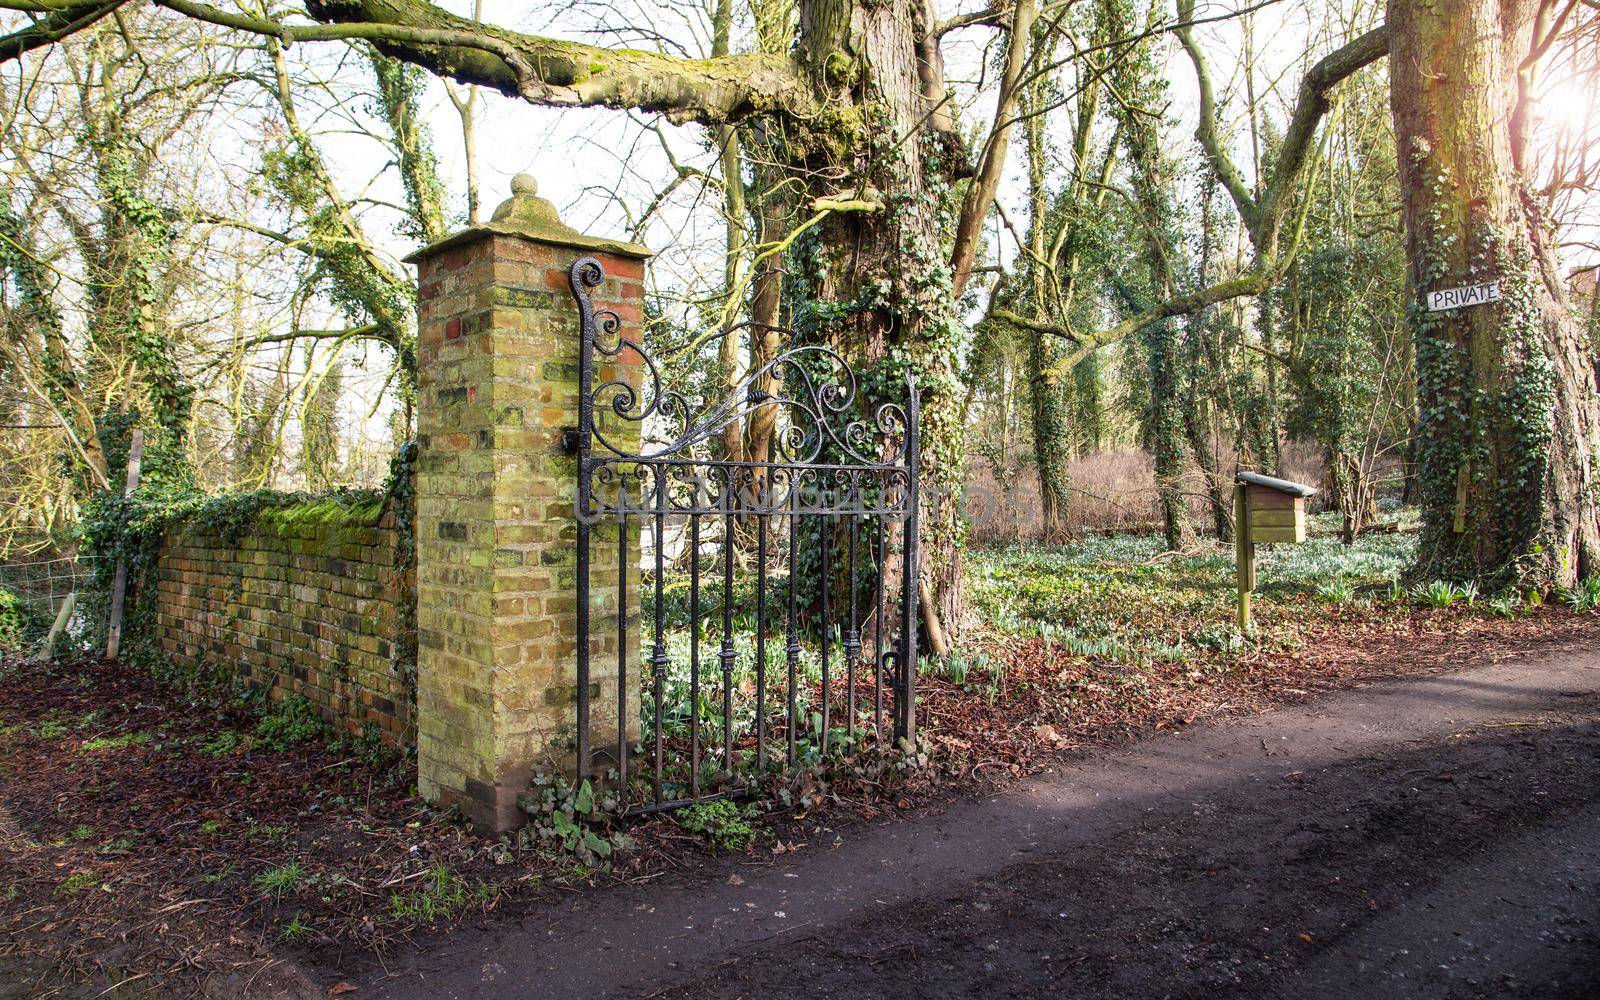 Gated Entrance to a private property by NelliPolk